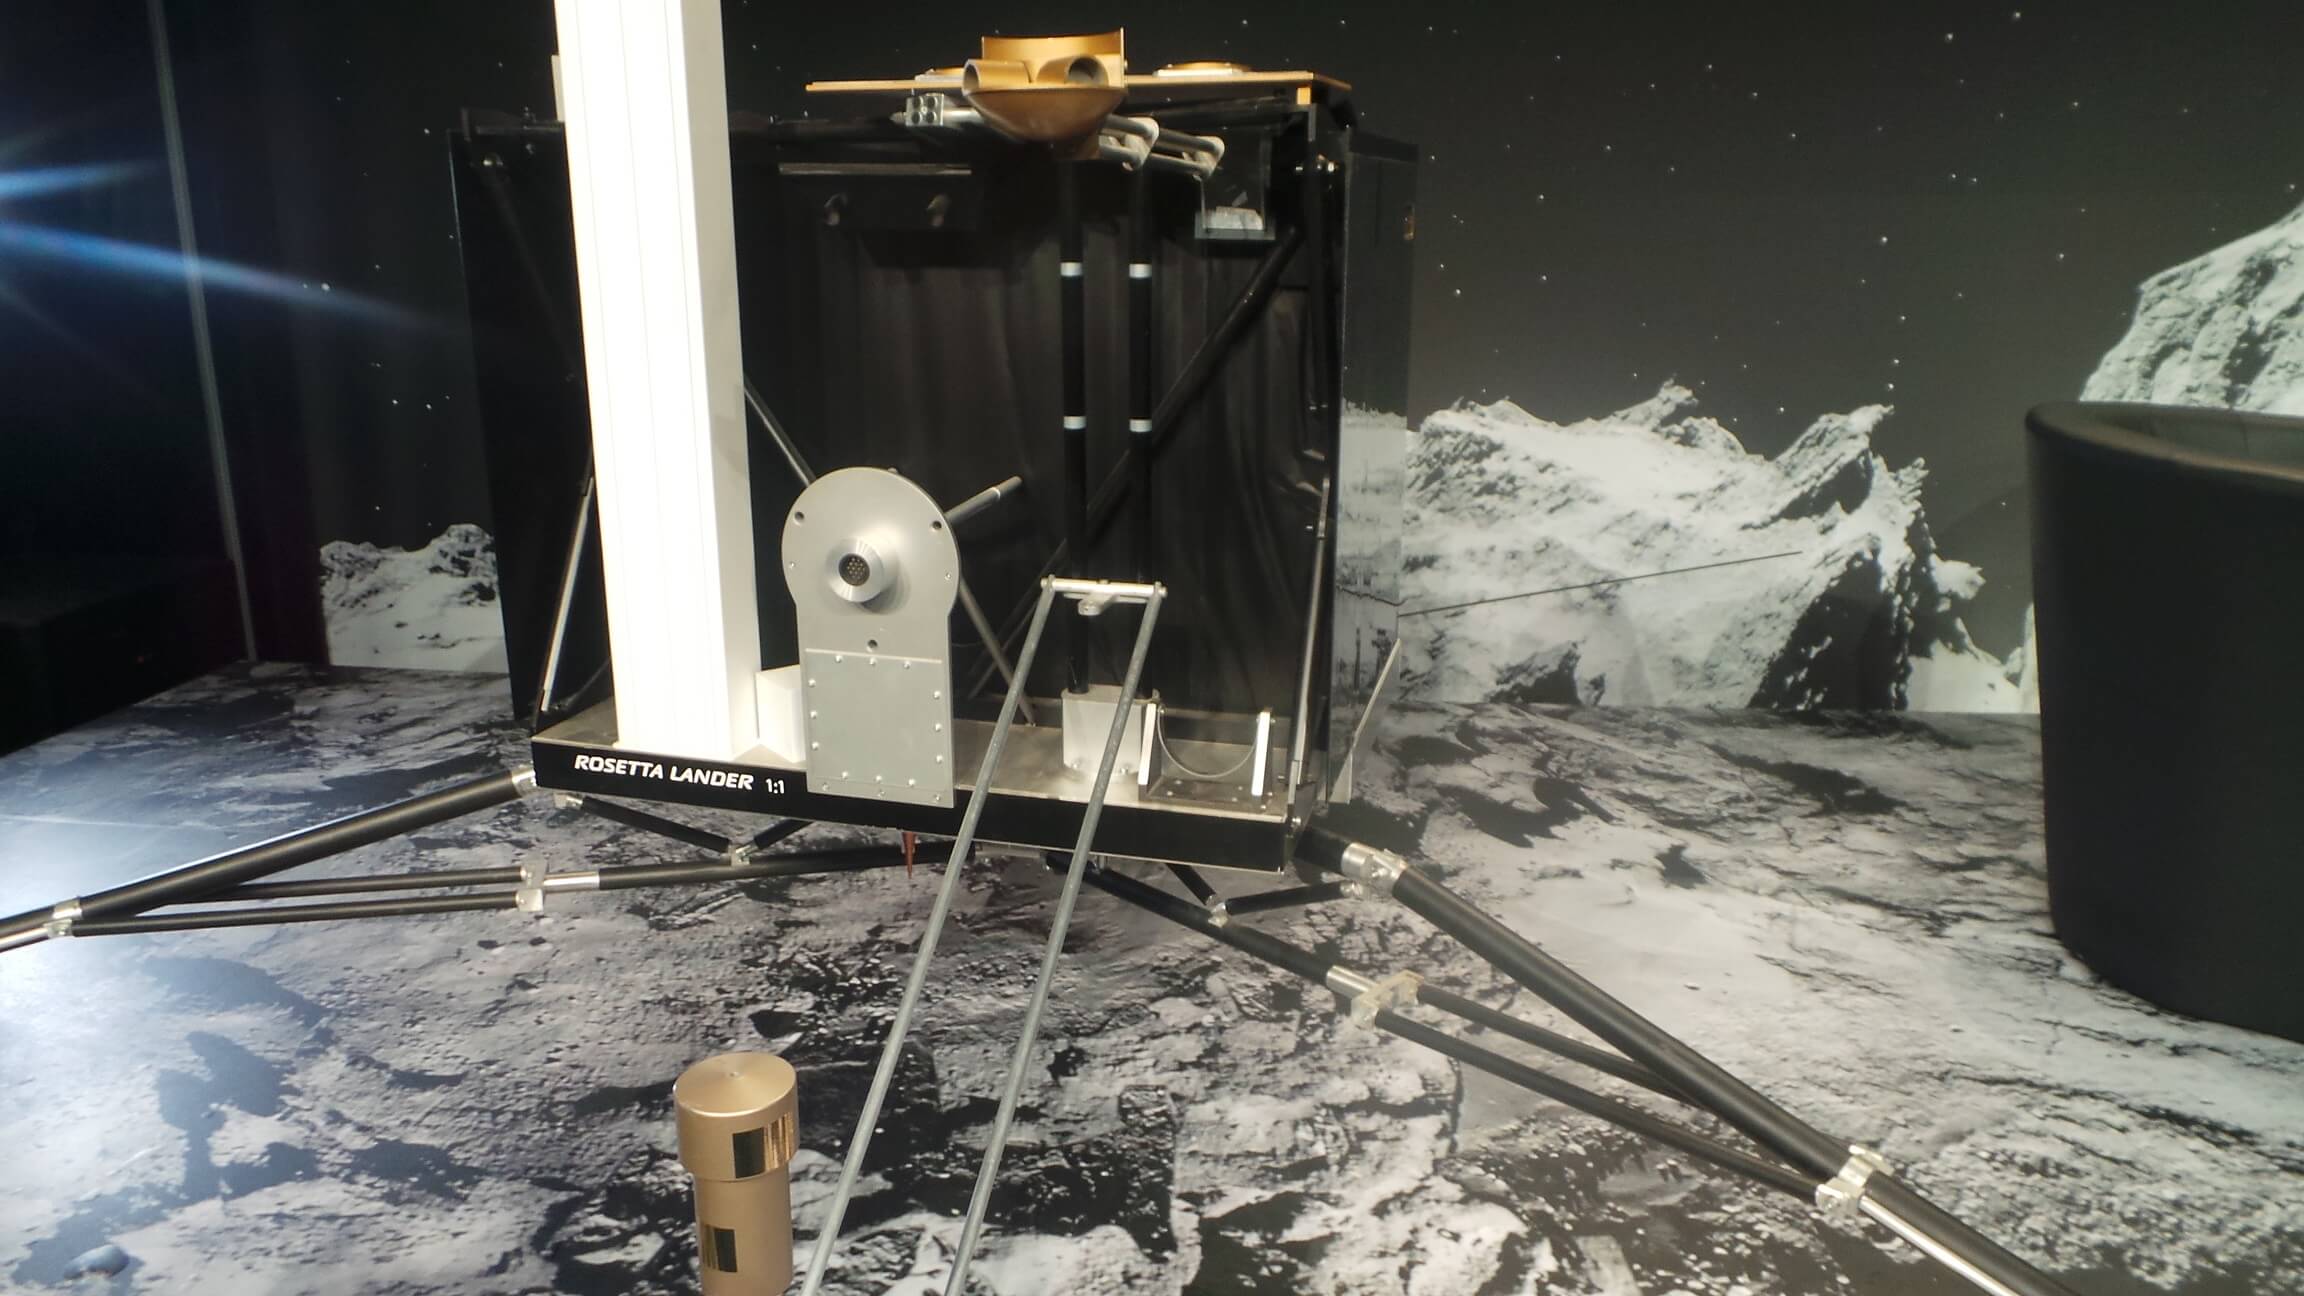 The model of the Philae lander on the stage of the event hall at the control center of the European Space Agency in Darmstadt, Germany, November 12, 2014. Photo: Avi Blizovsky